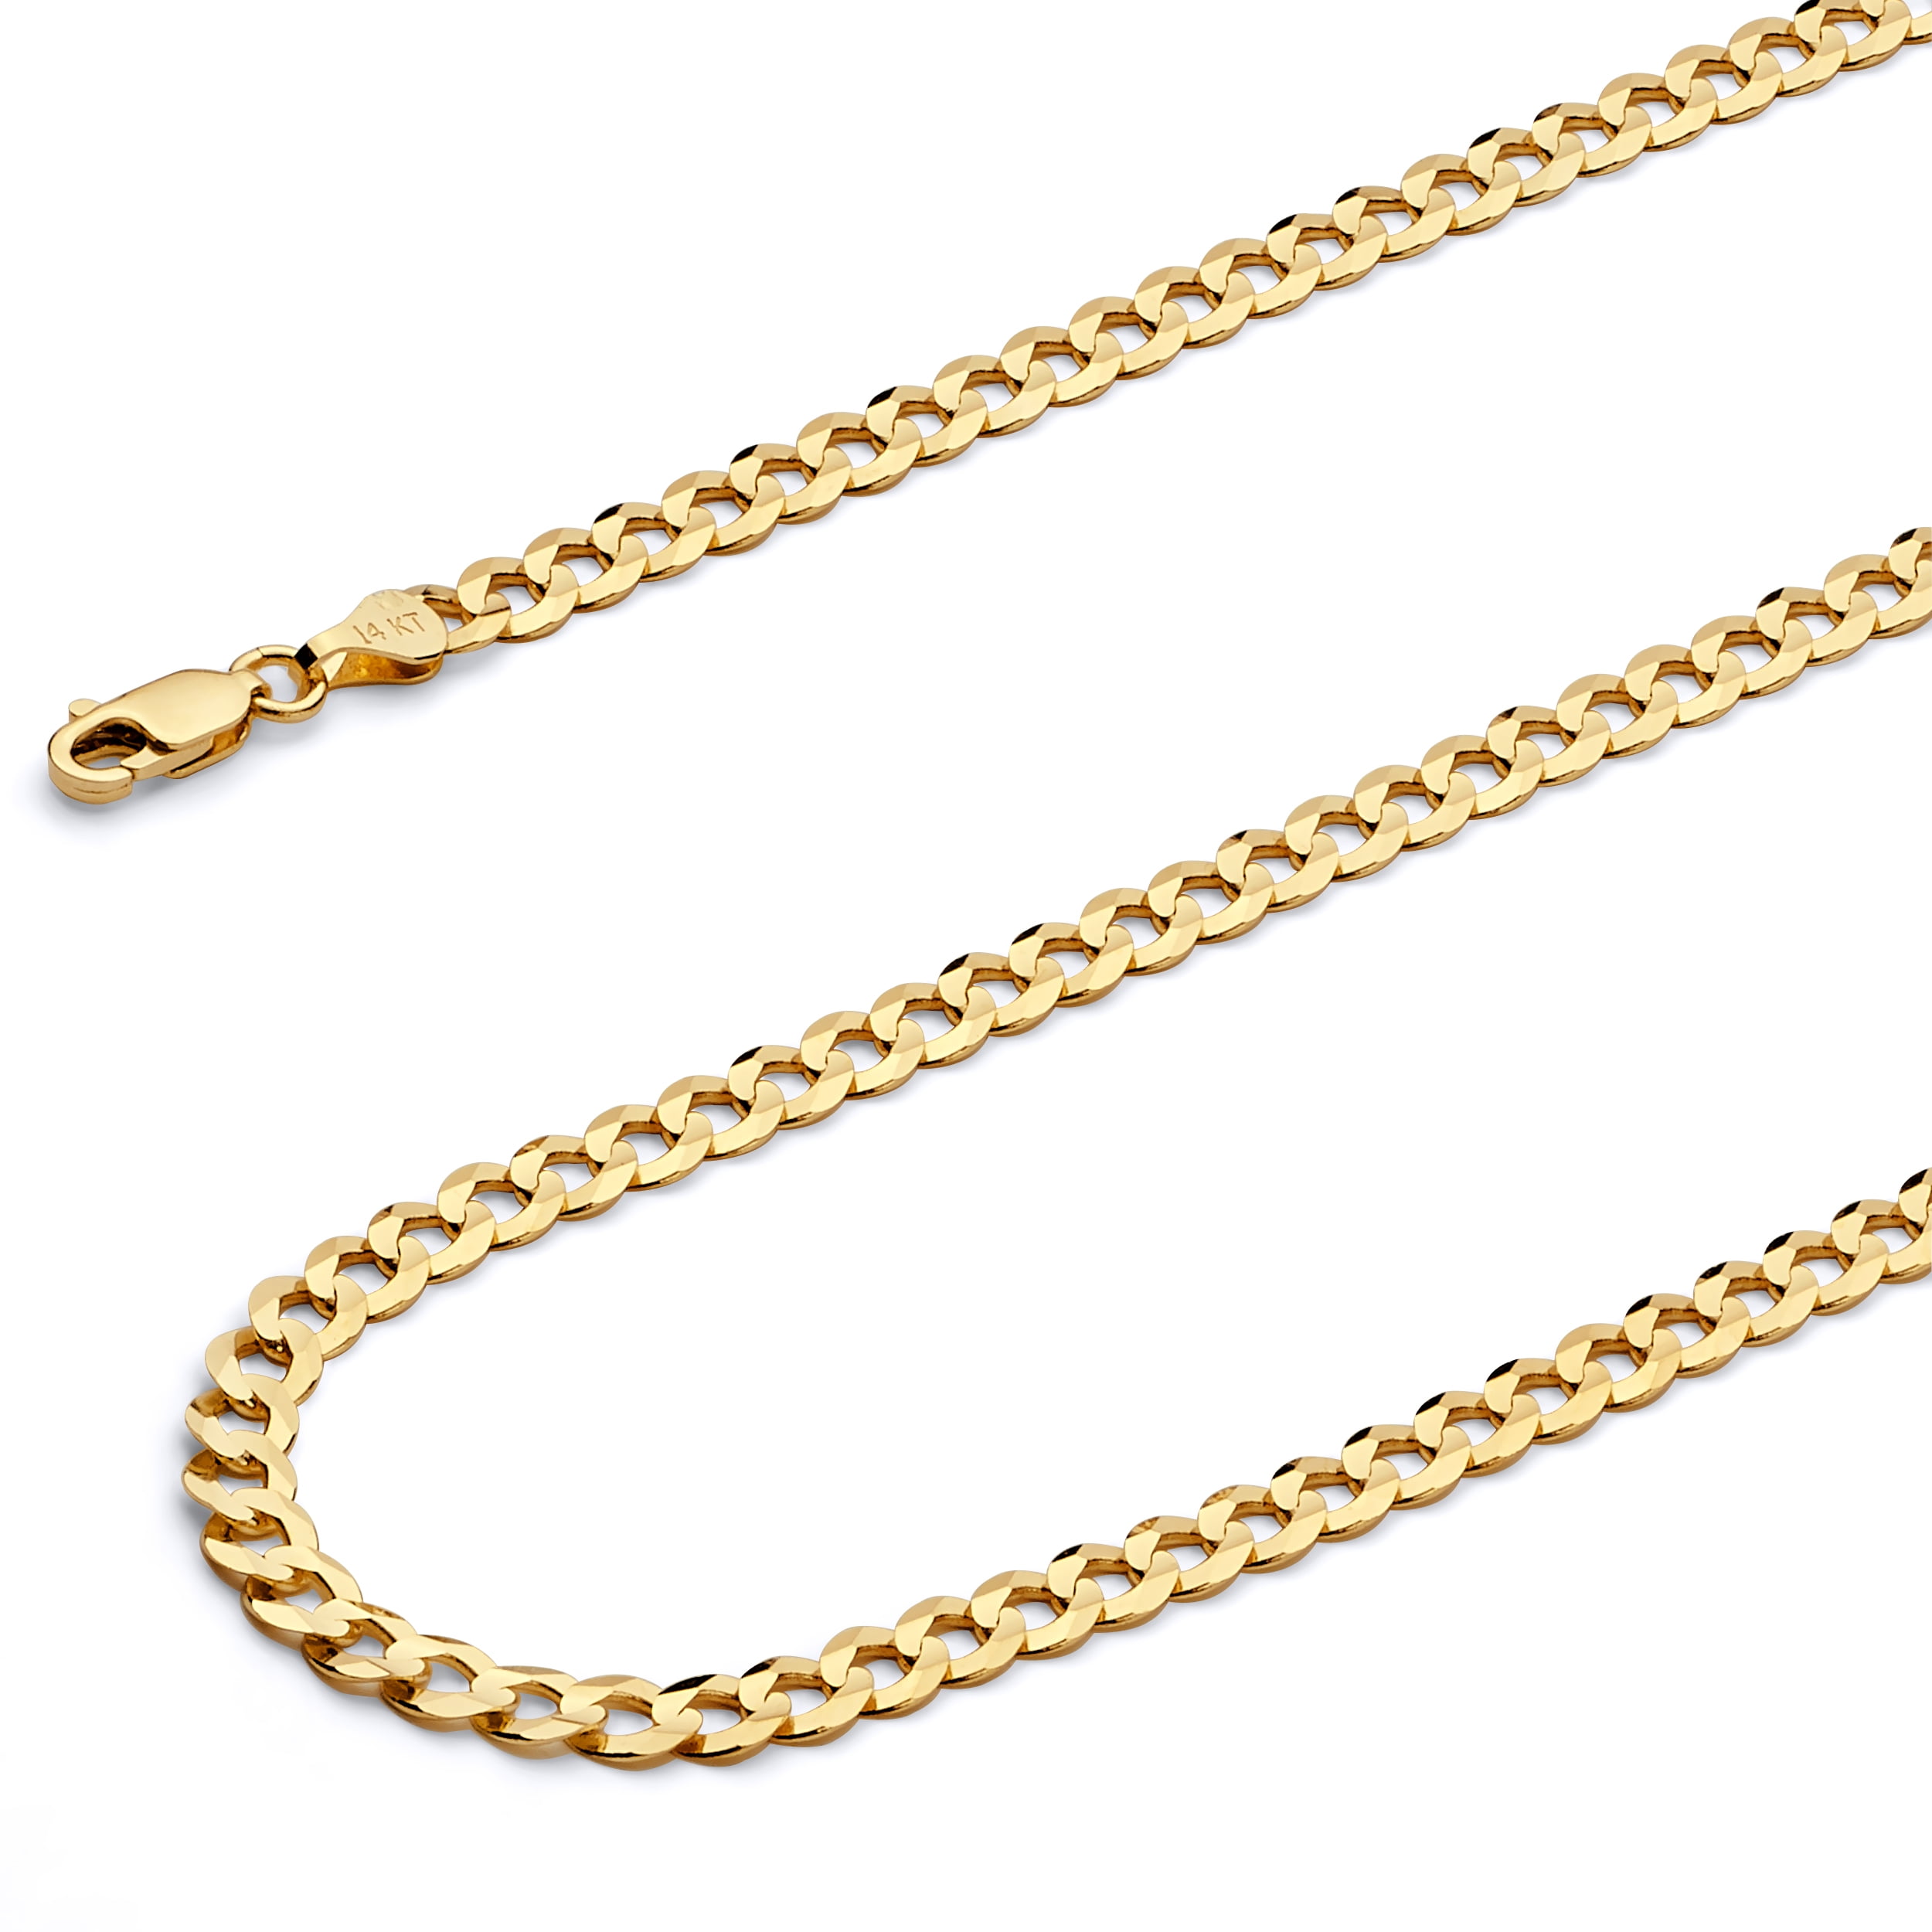 Wellingsale 14k Yellow Gold 2.5mm Diamond Cut HOLLOW Rope Chain Necklace with Lobster Claw Clasp